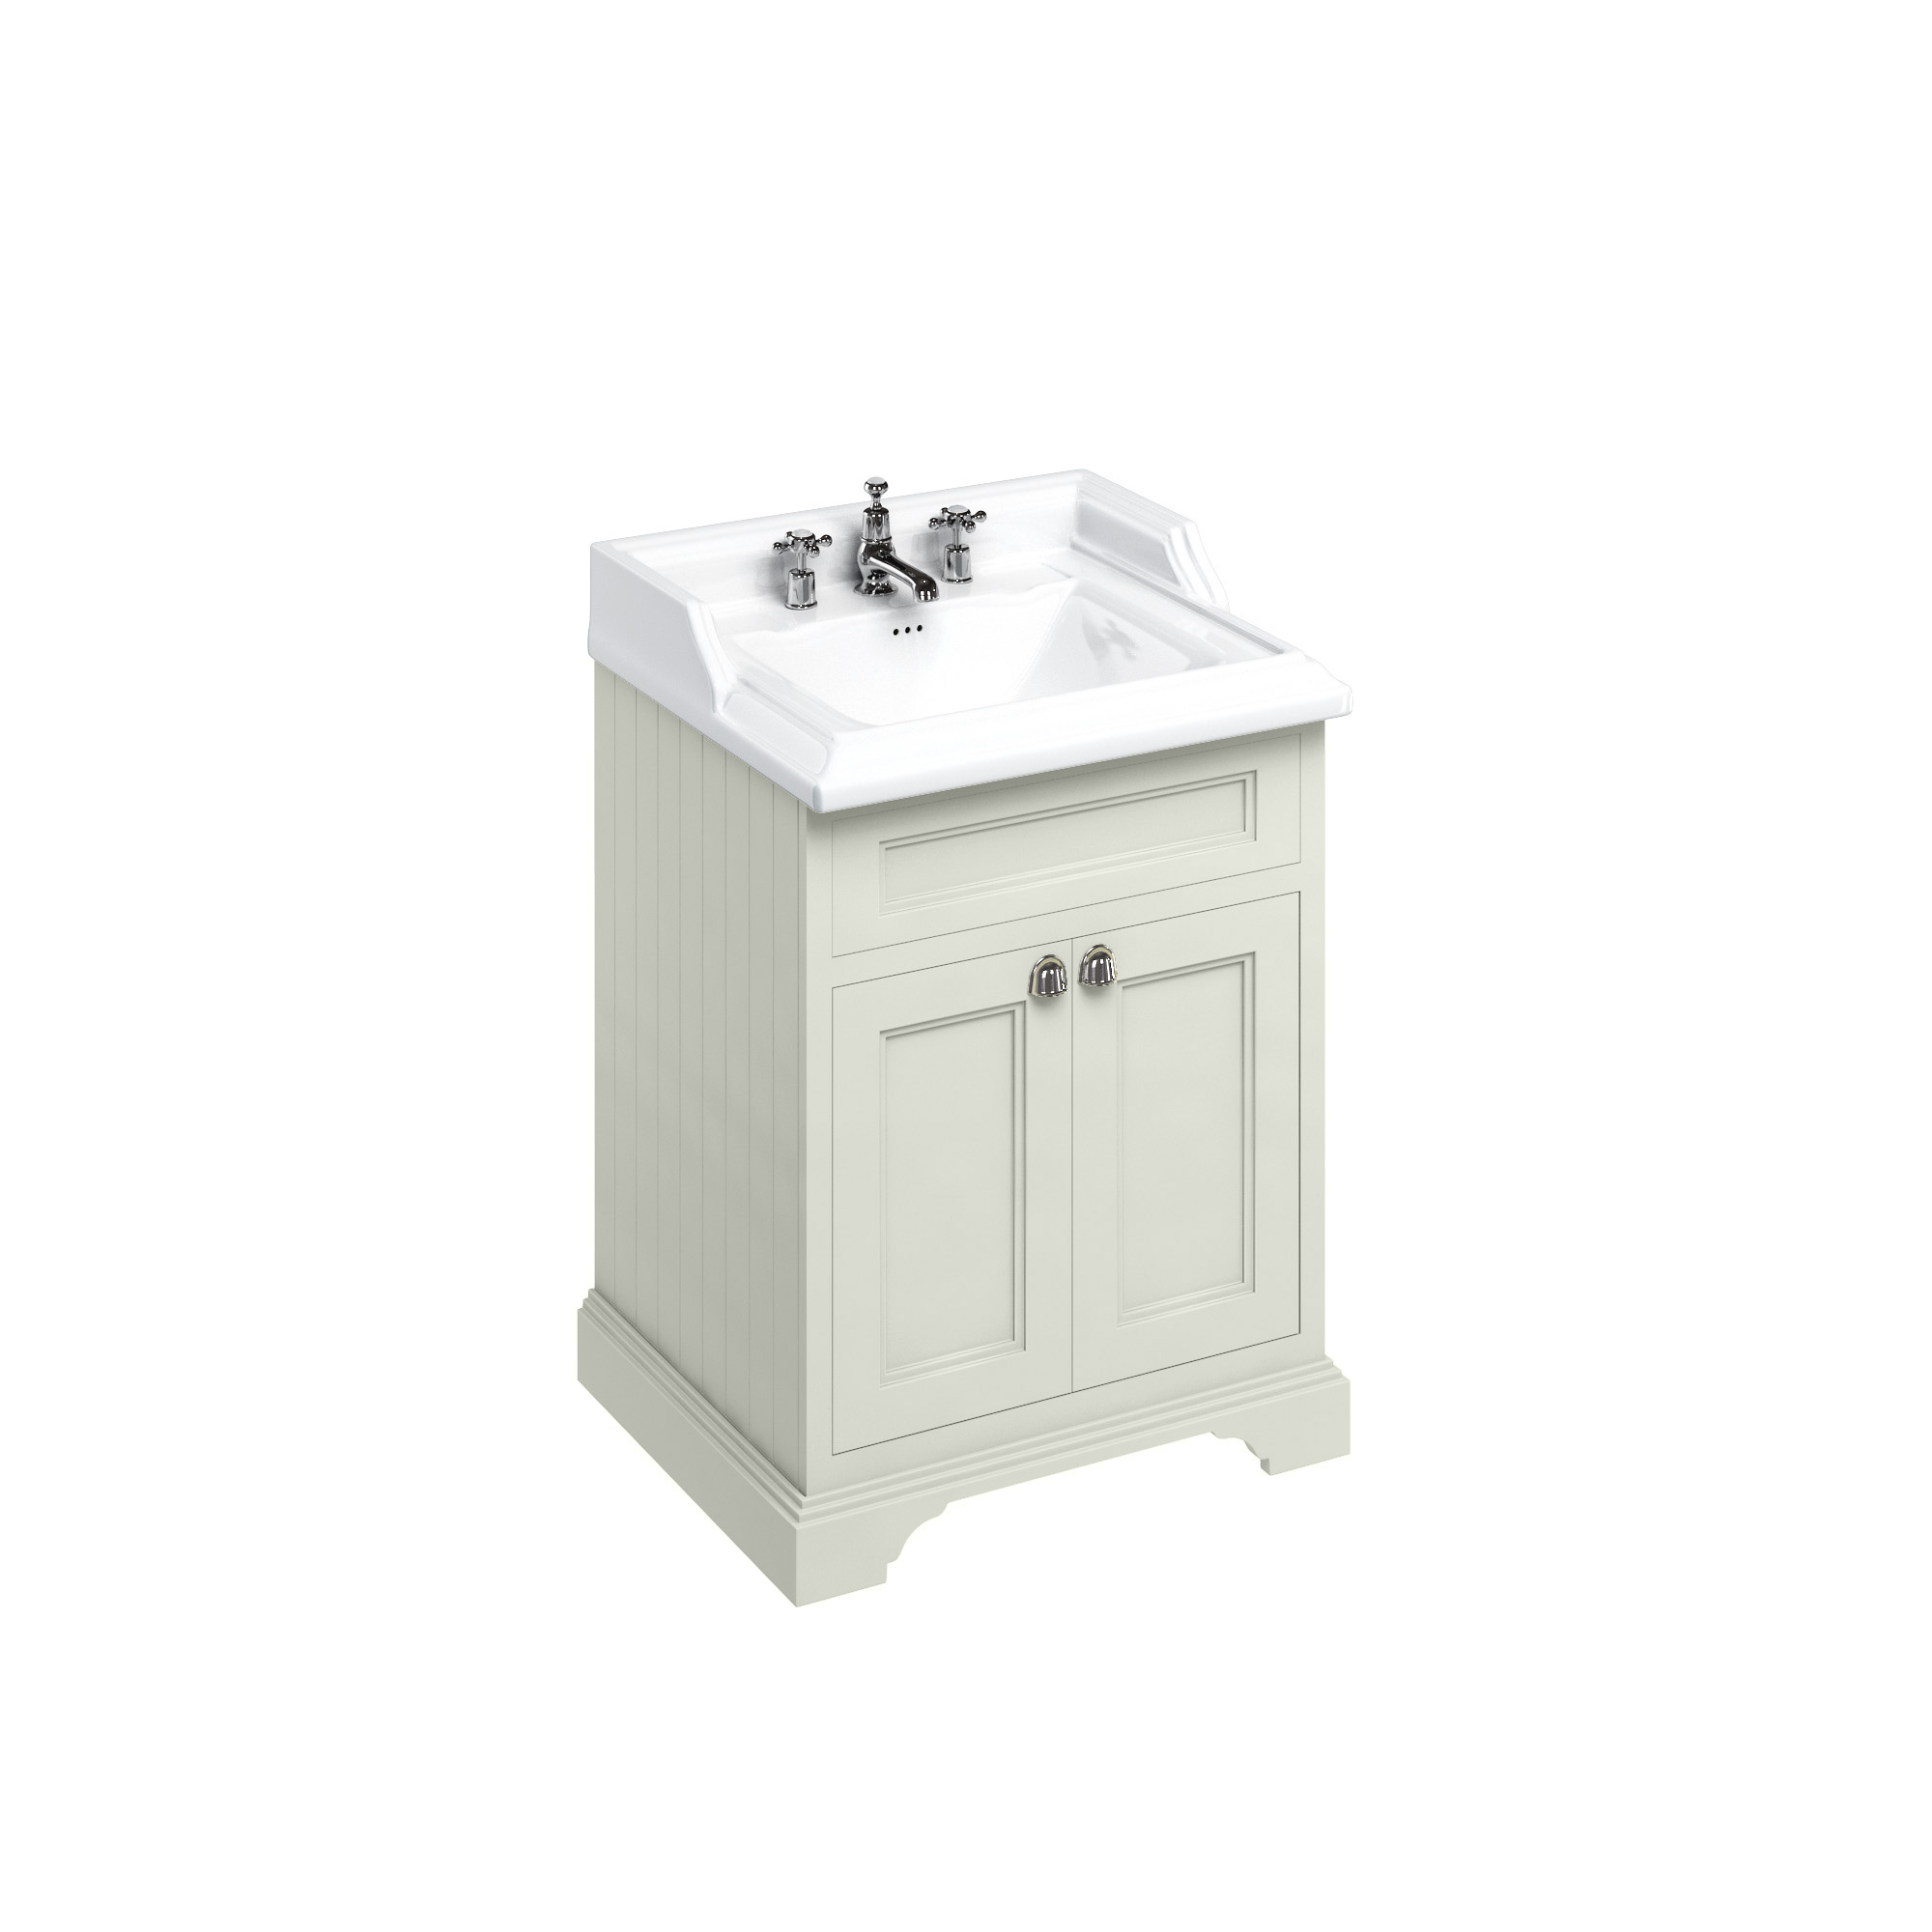 Freestanding 65 Vanity Unit with doors - Sand and Classic basin 3 tap holes